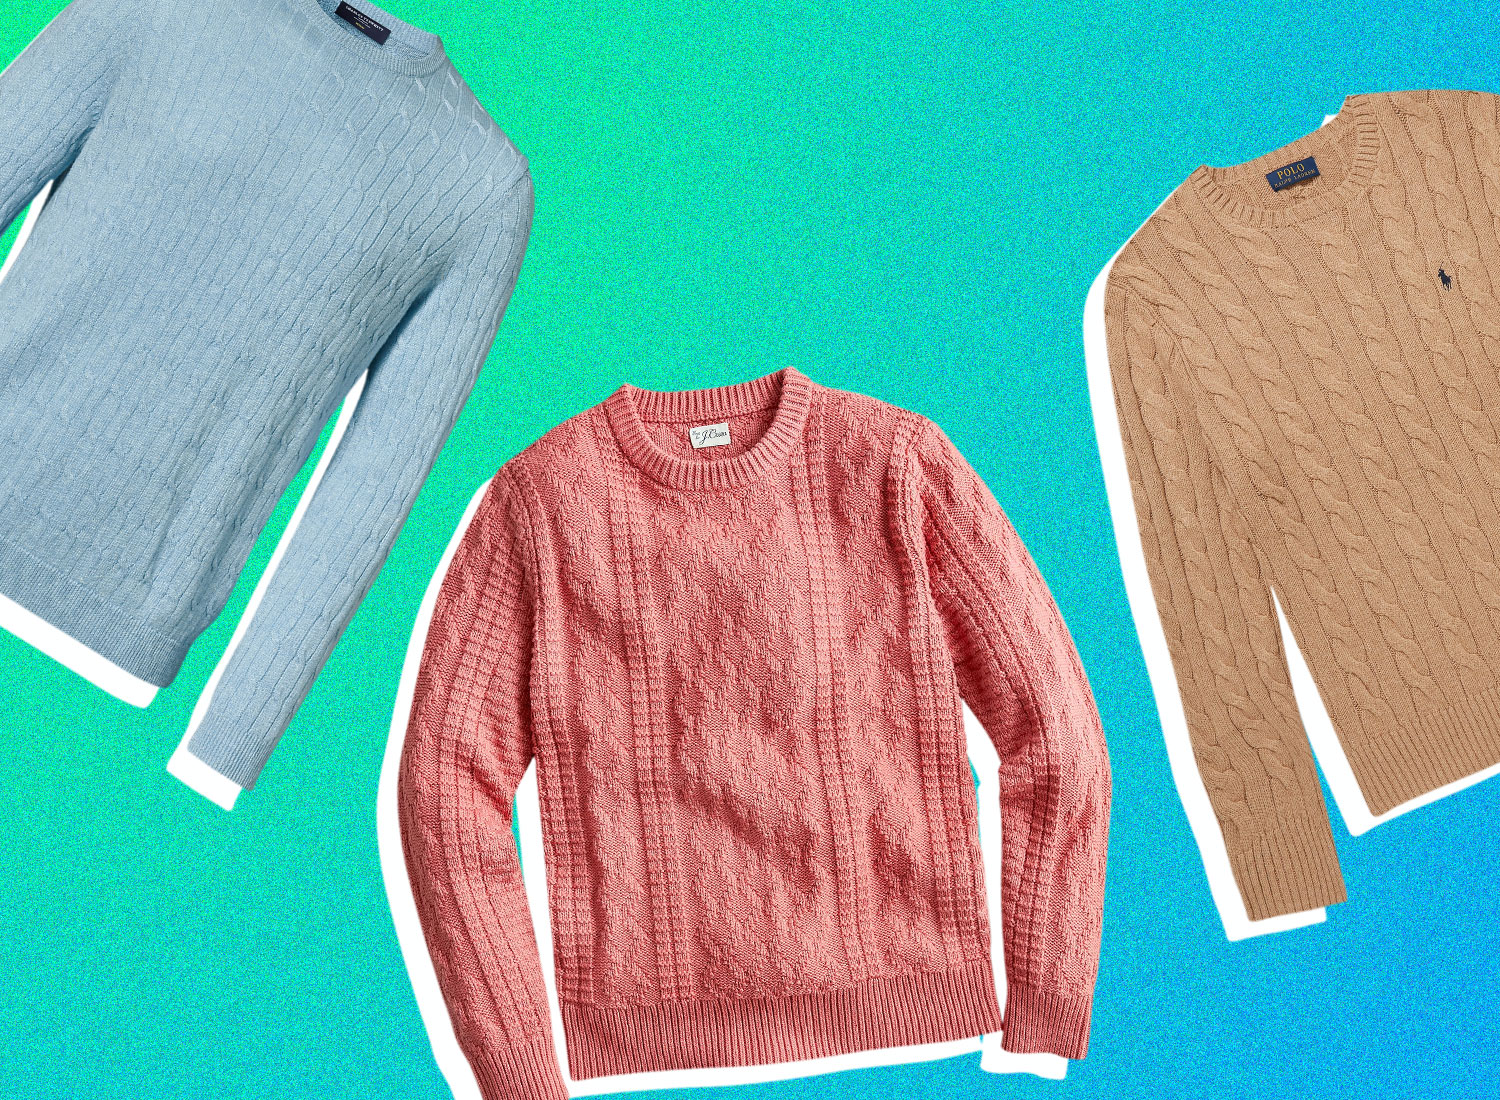 15 Best Cable Knit Sweaters For Men